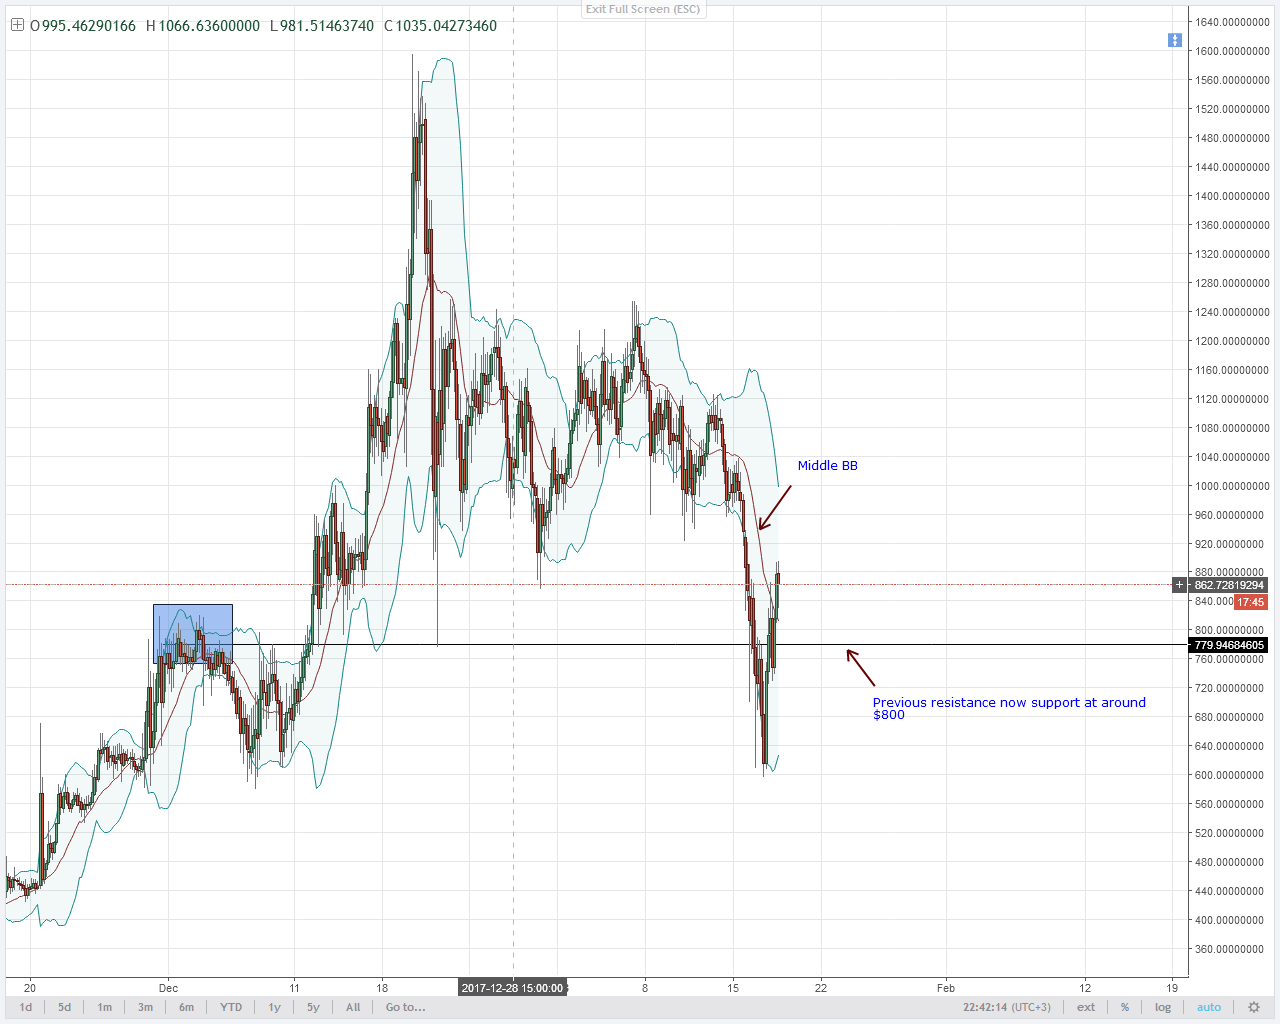 IS DASH RECOVERY ON-COURSE OR SELLERS ARE ANGLING FOR ENTRIES?